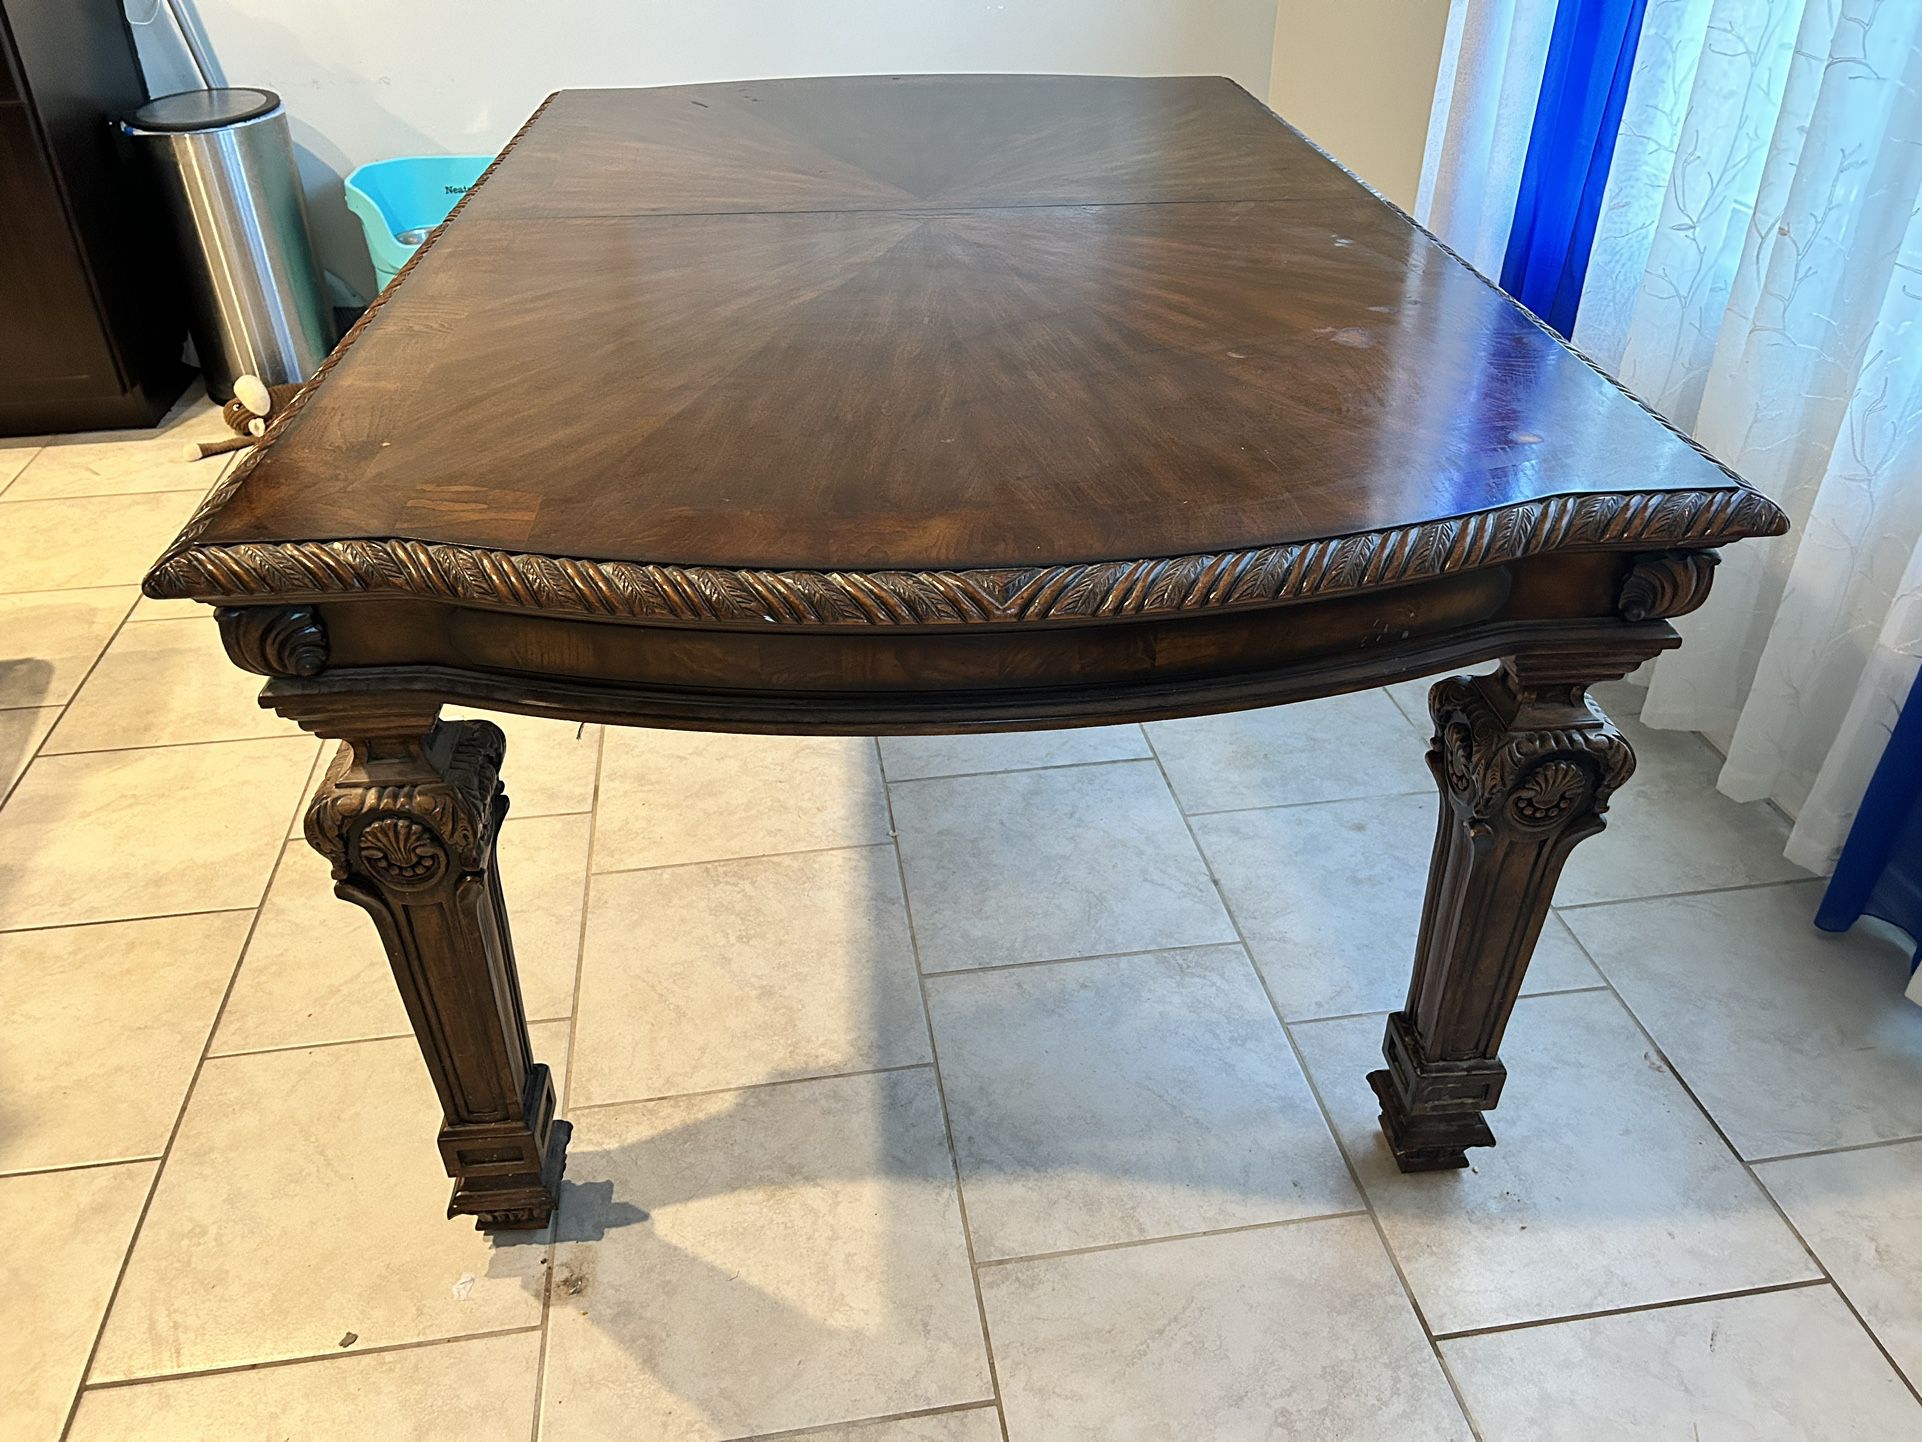 Formal Dining Table 